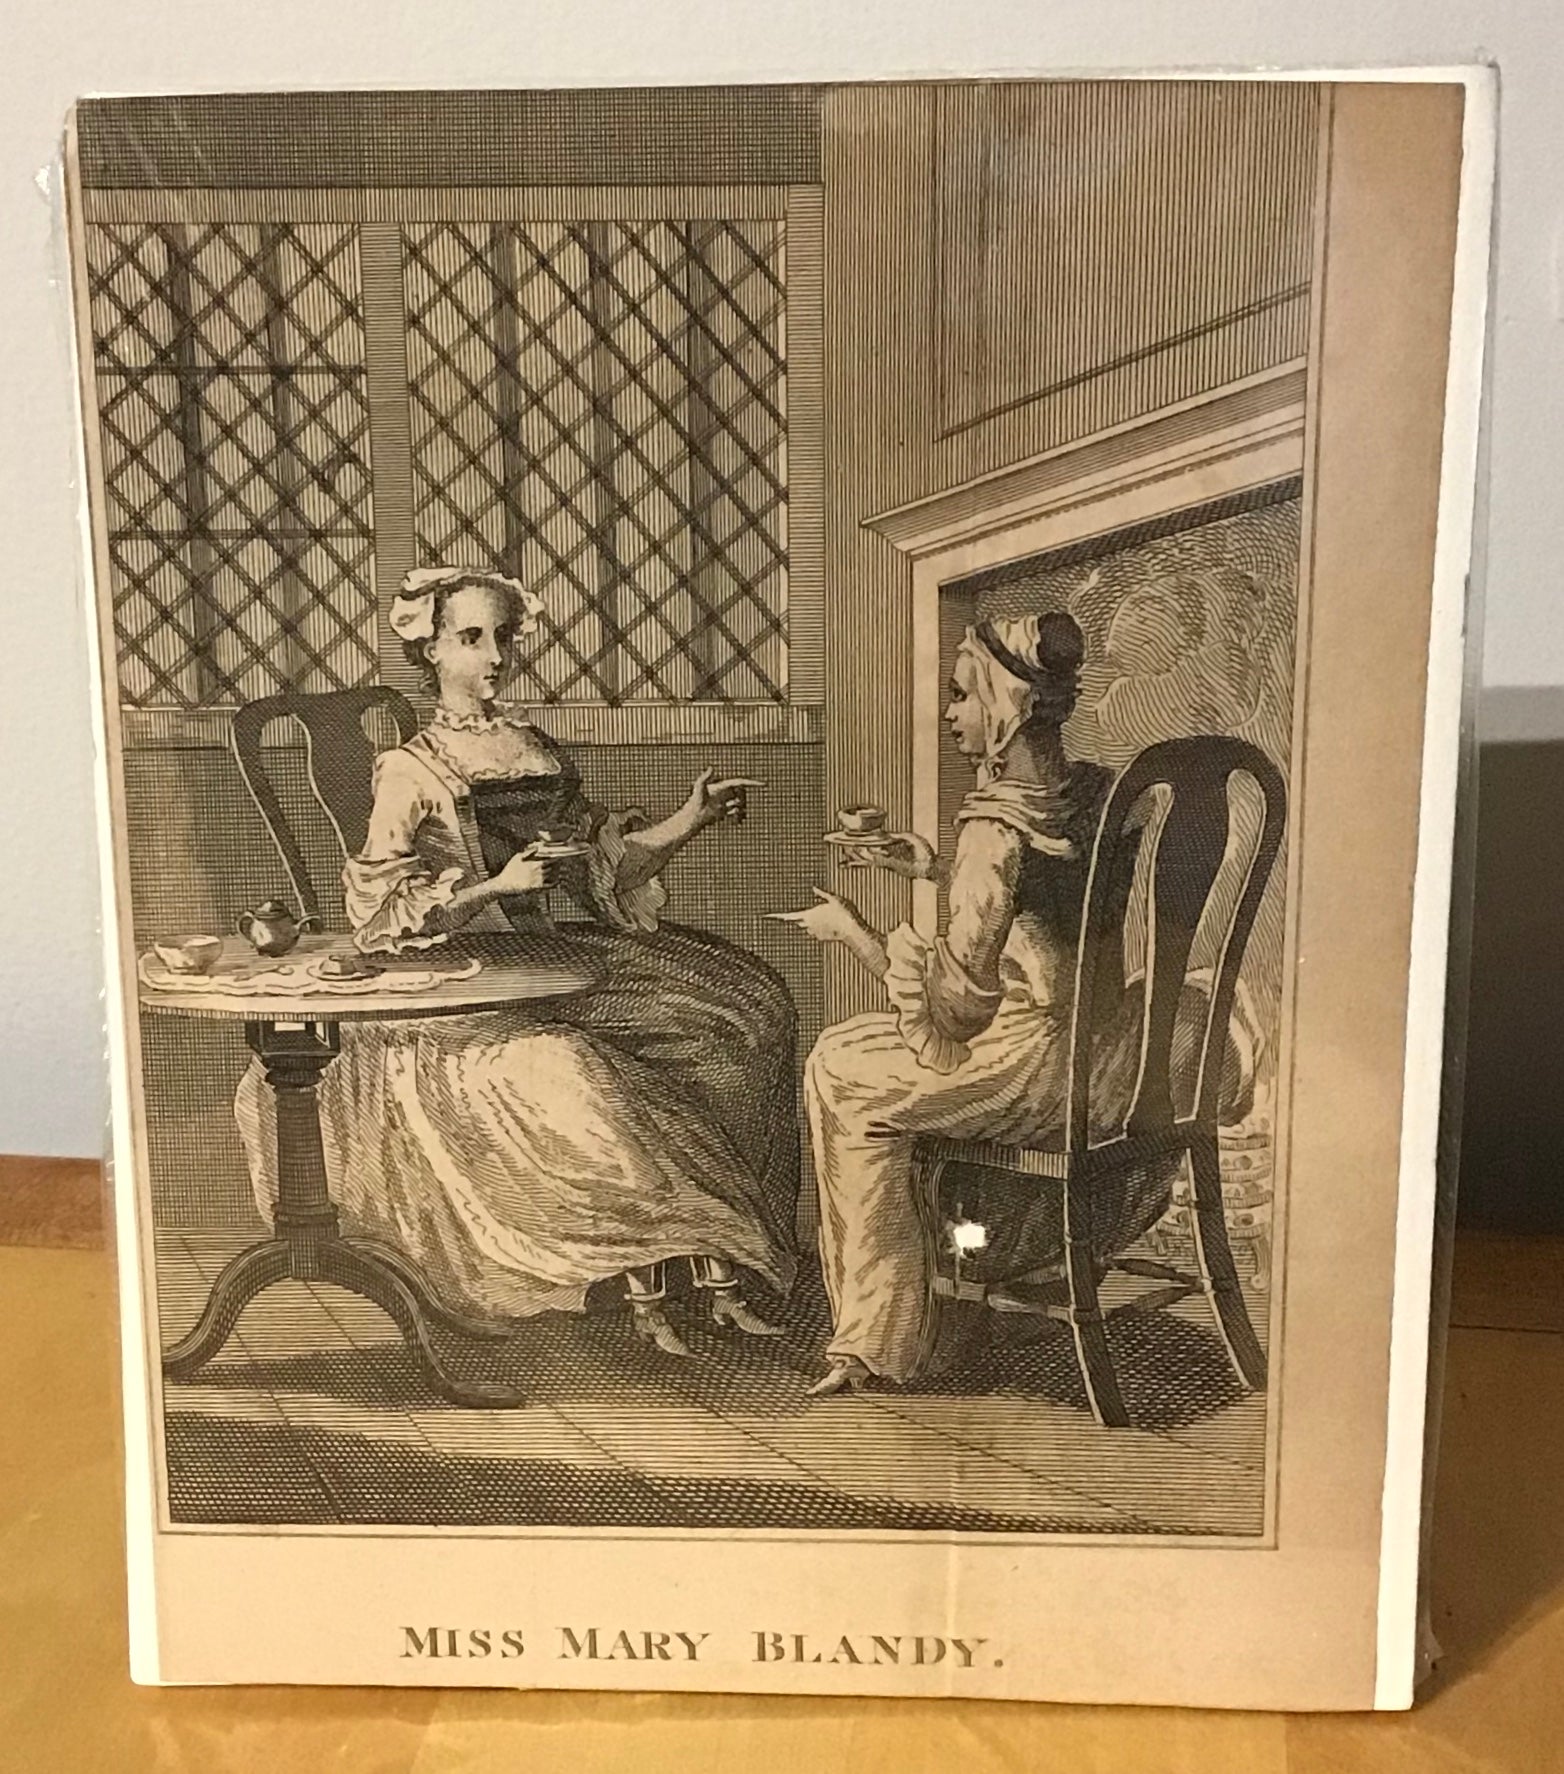 Miss Mary Blandy - Engraving